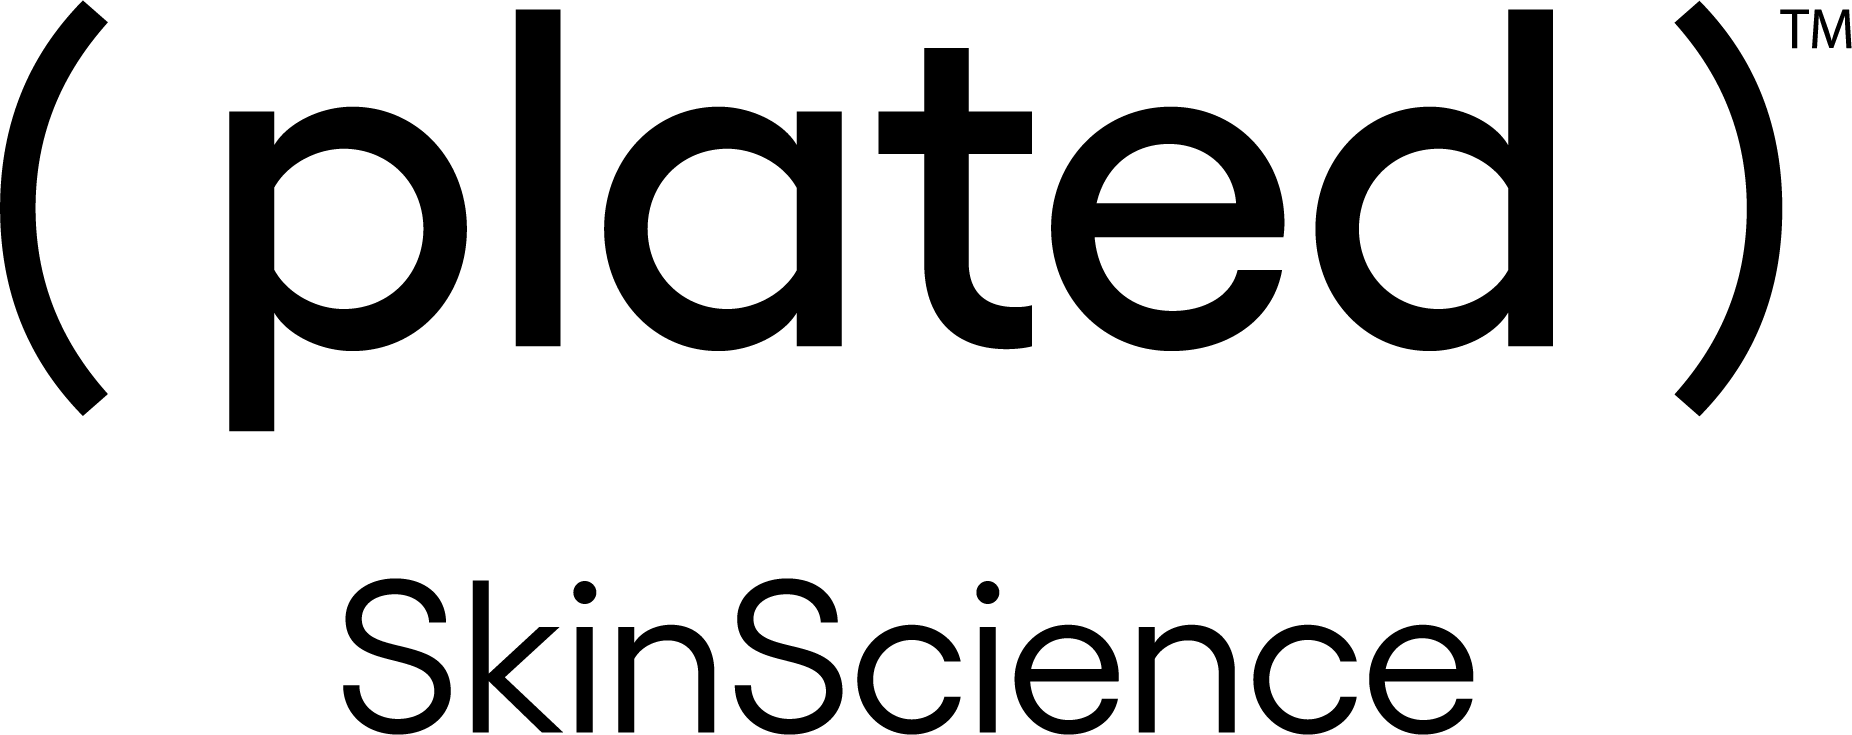 plated skin science logo